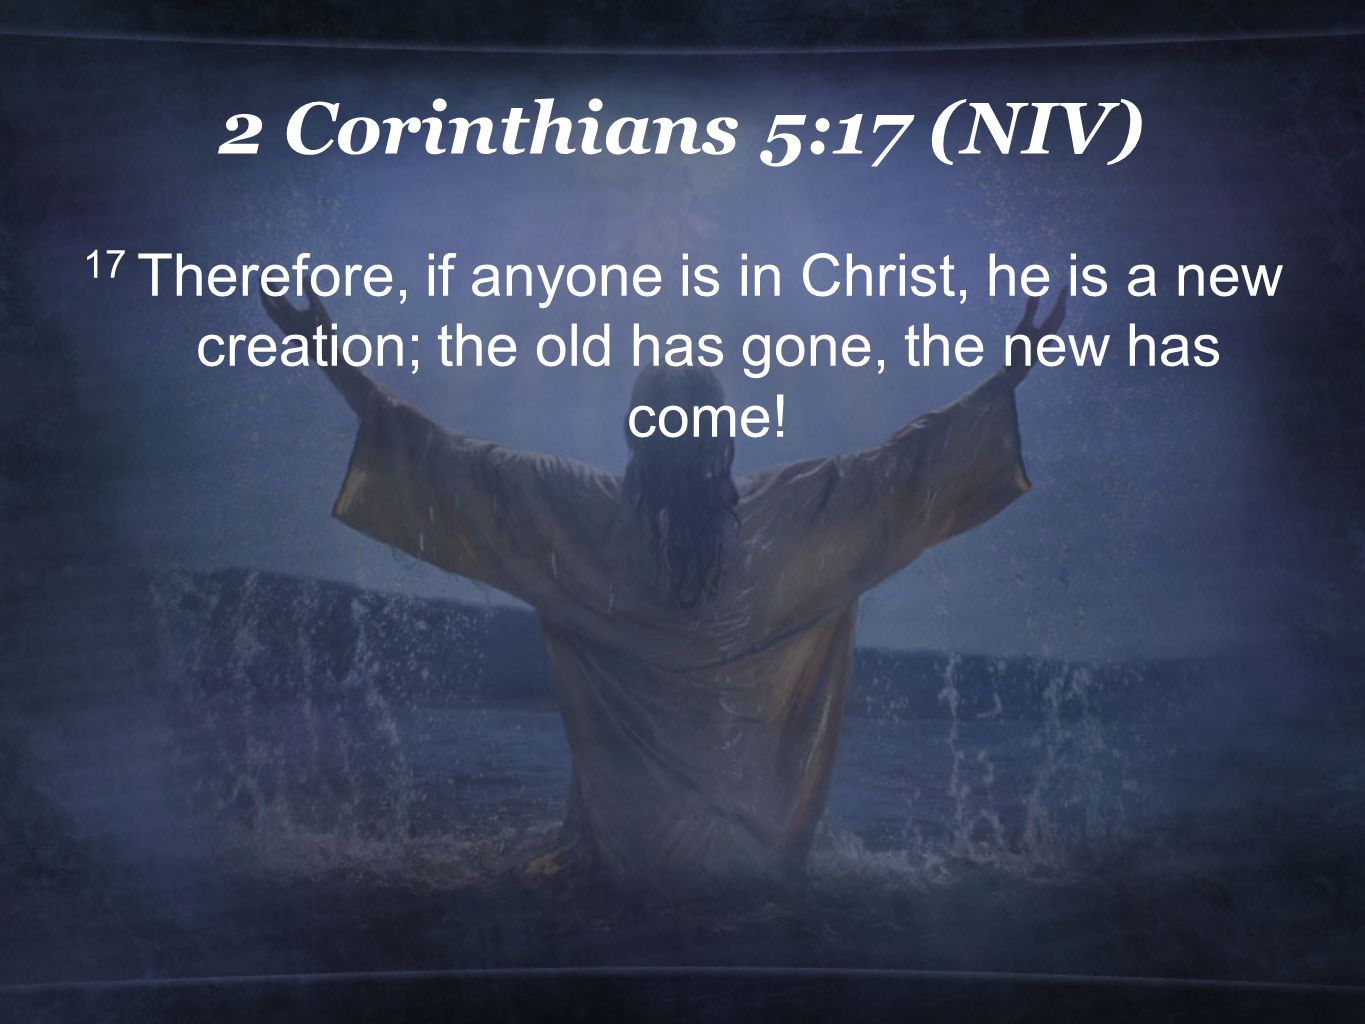 2 Corinthians 5:17 (NIV) 17 Therefore, if anyone is in Christ, he is a new creation; the old has gone, the new has come!